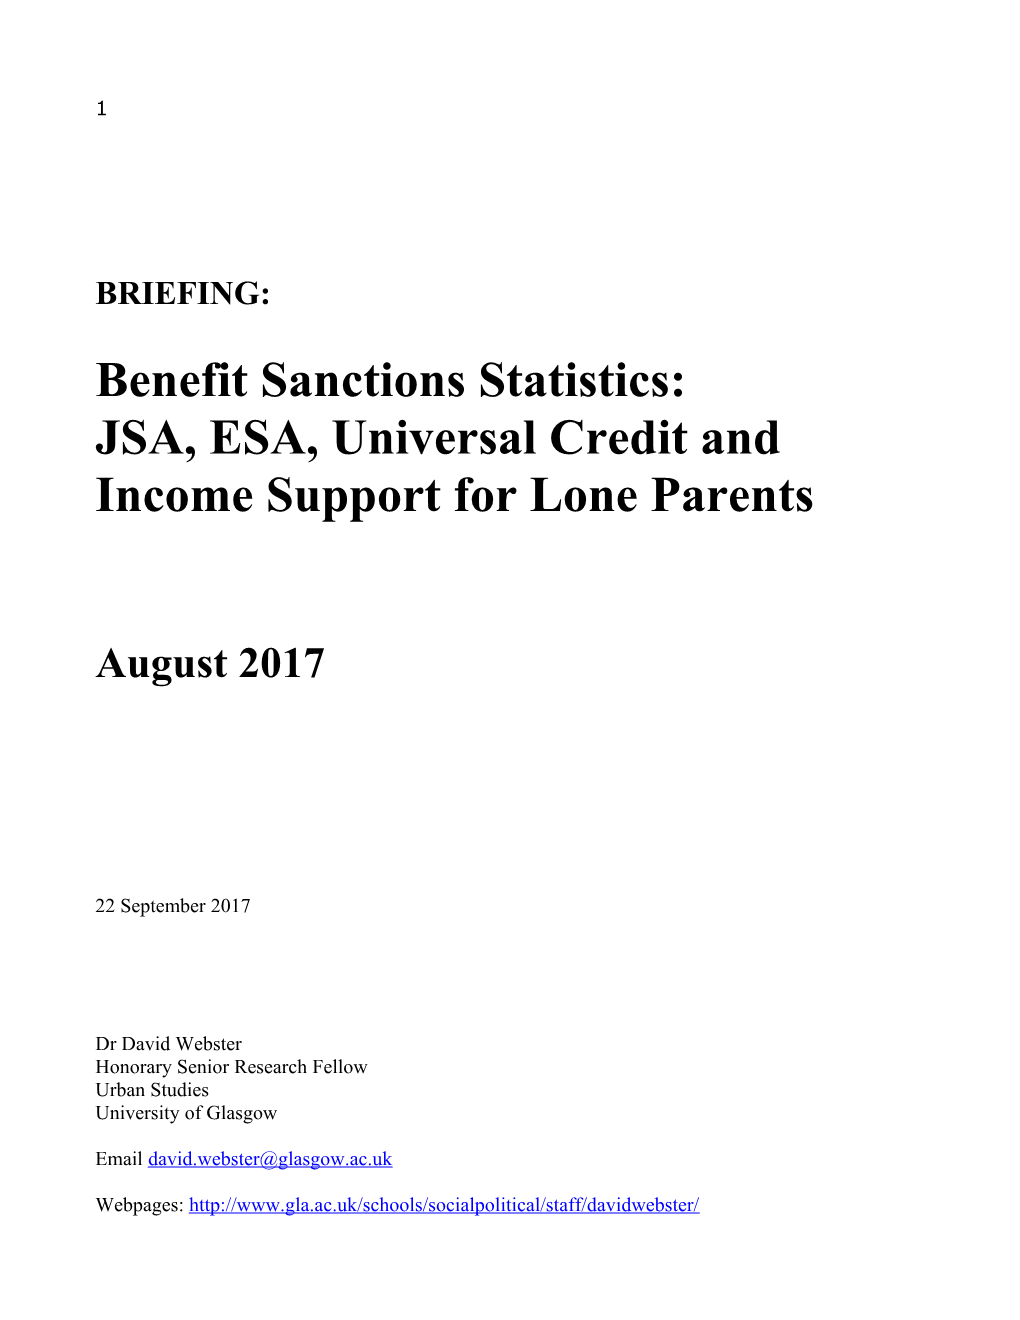 JSA, ESA,Universal Credit and Income Support for Lone Parents